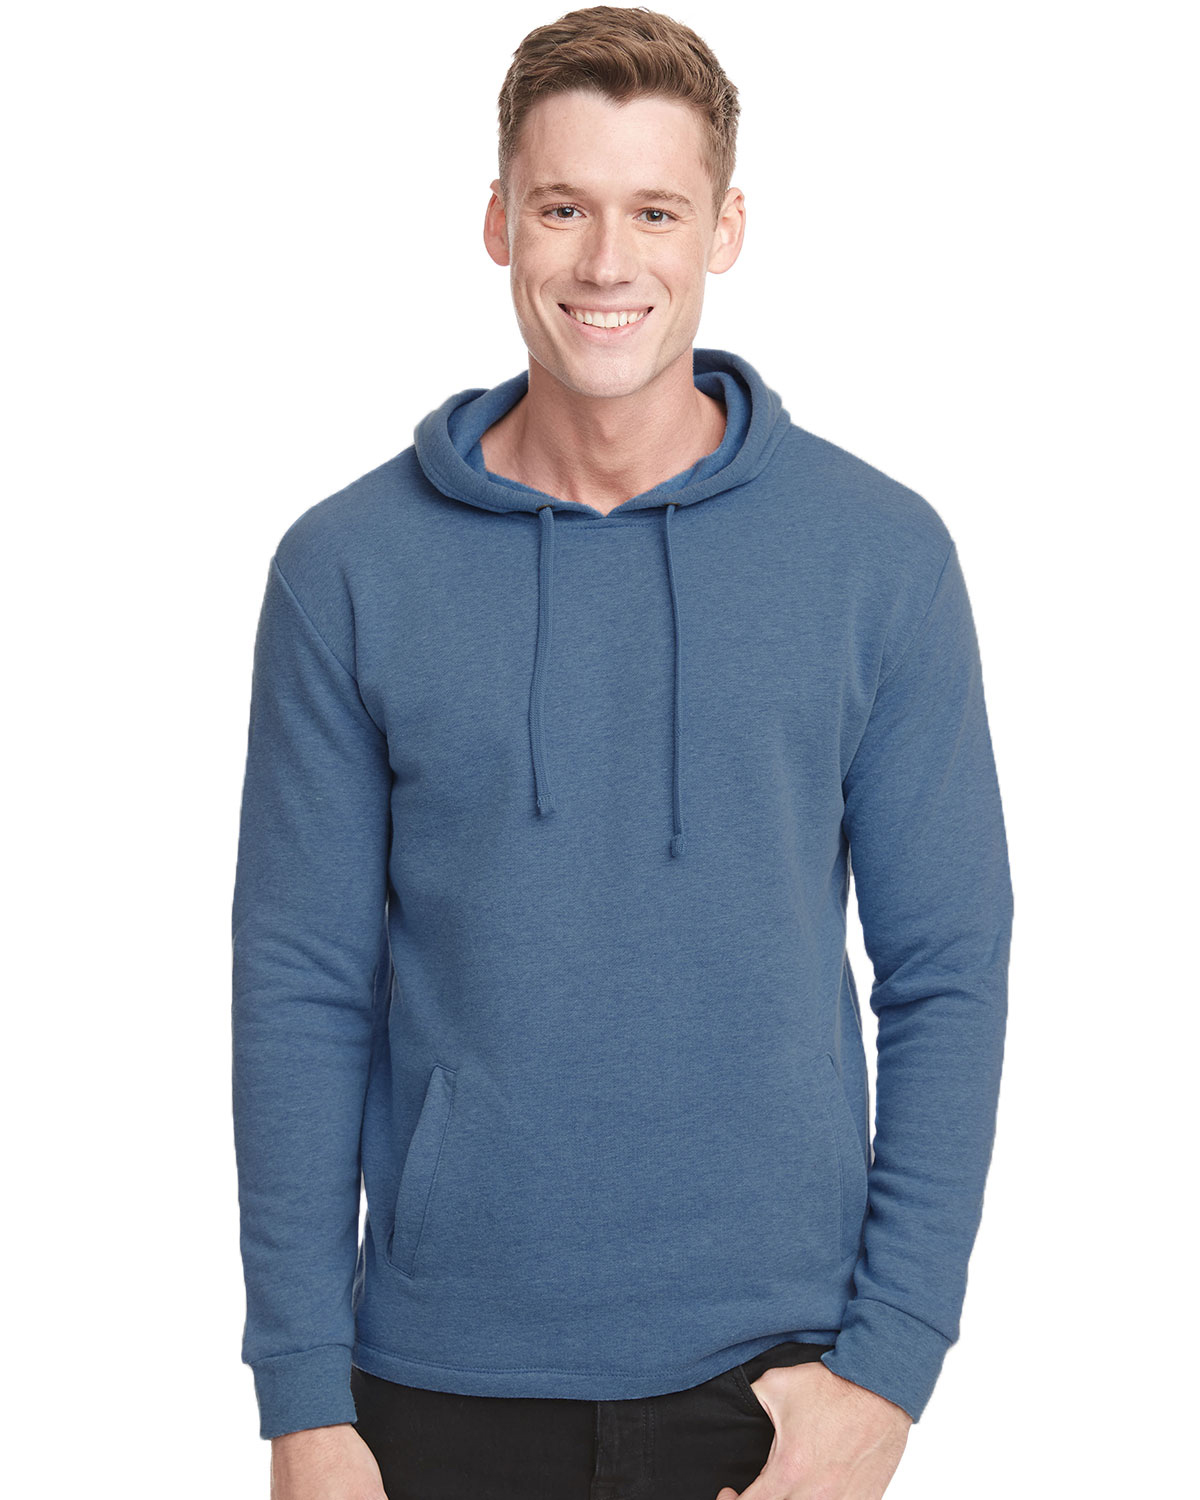 Next Level 9300 Adult PCH Pullover Hoody | JiffyShirts